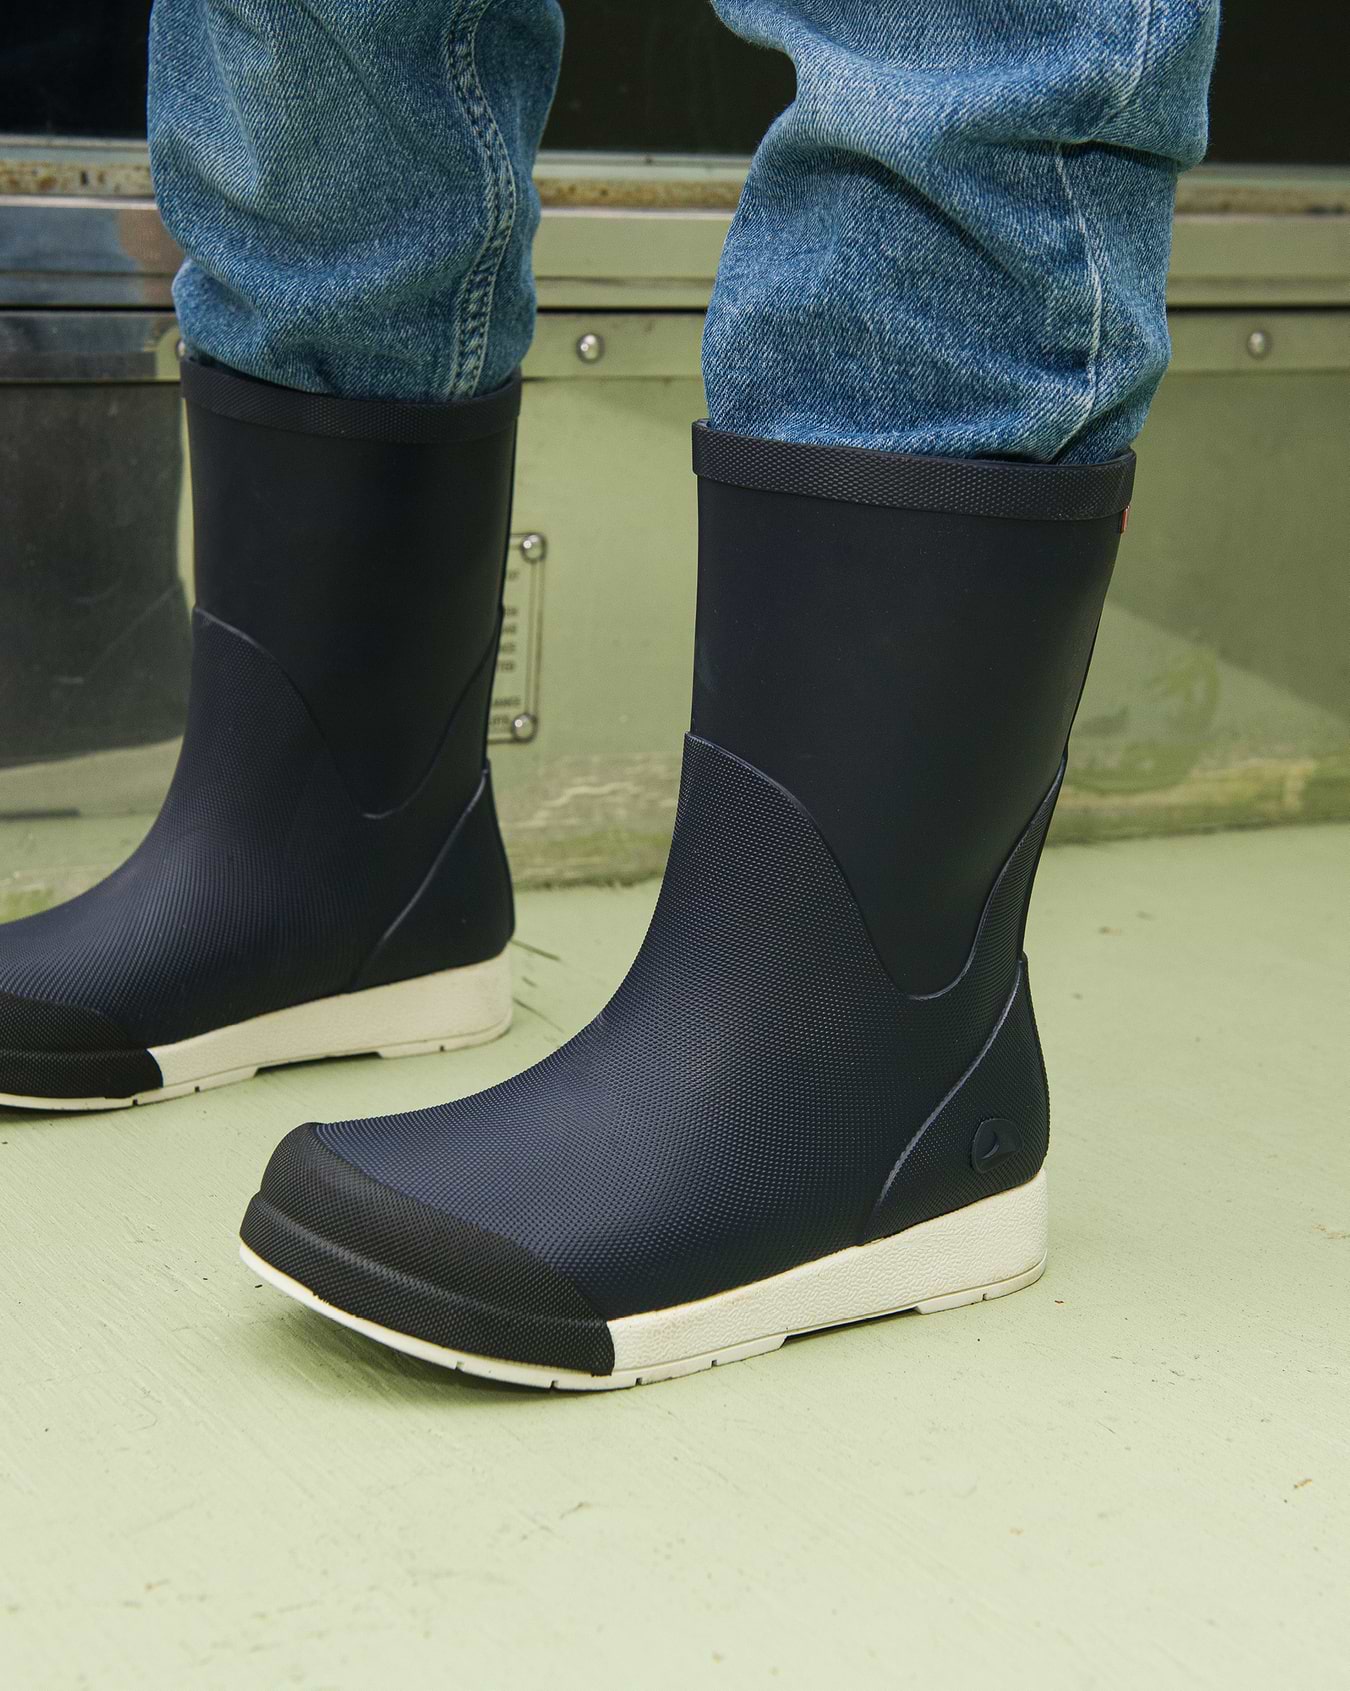 River Black/Charcoal Rubber Boot